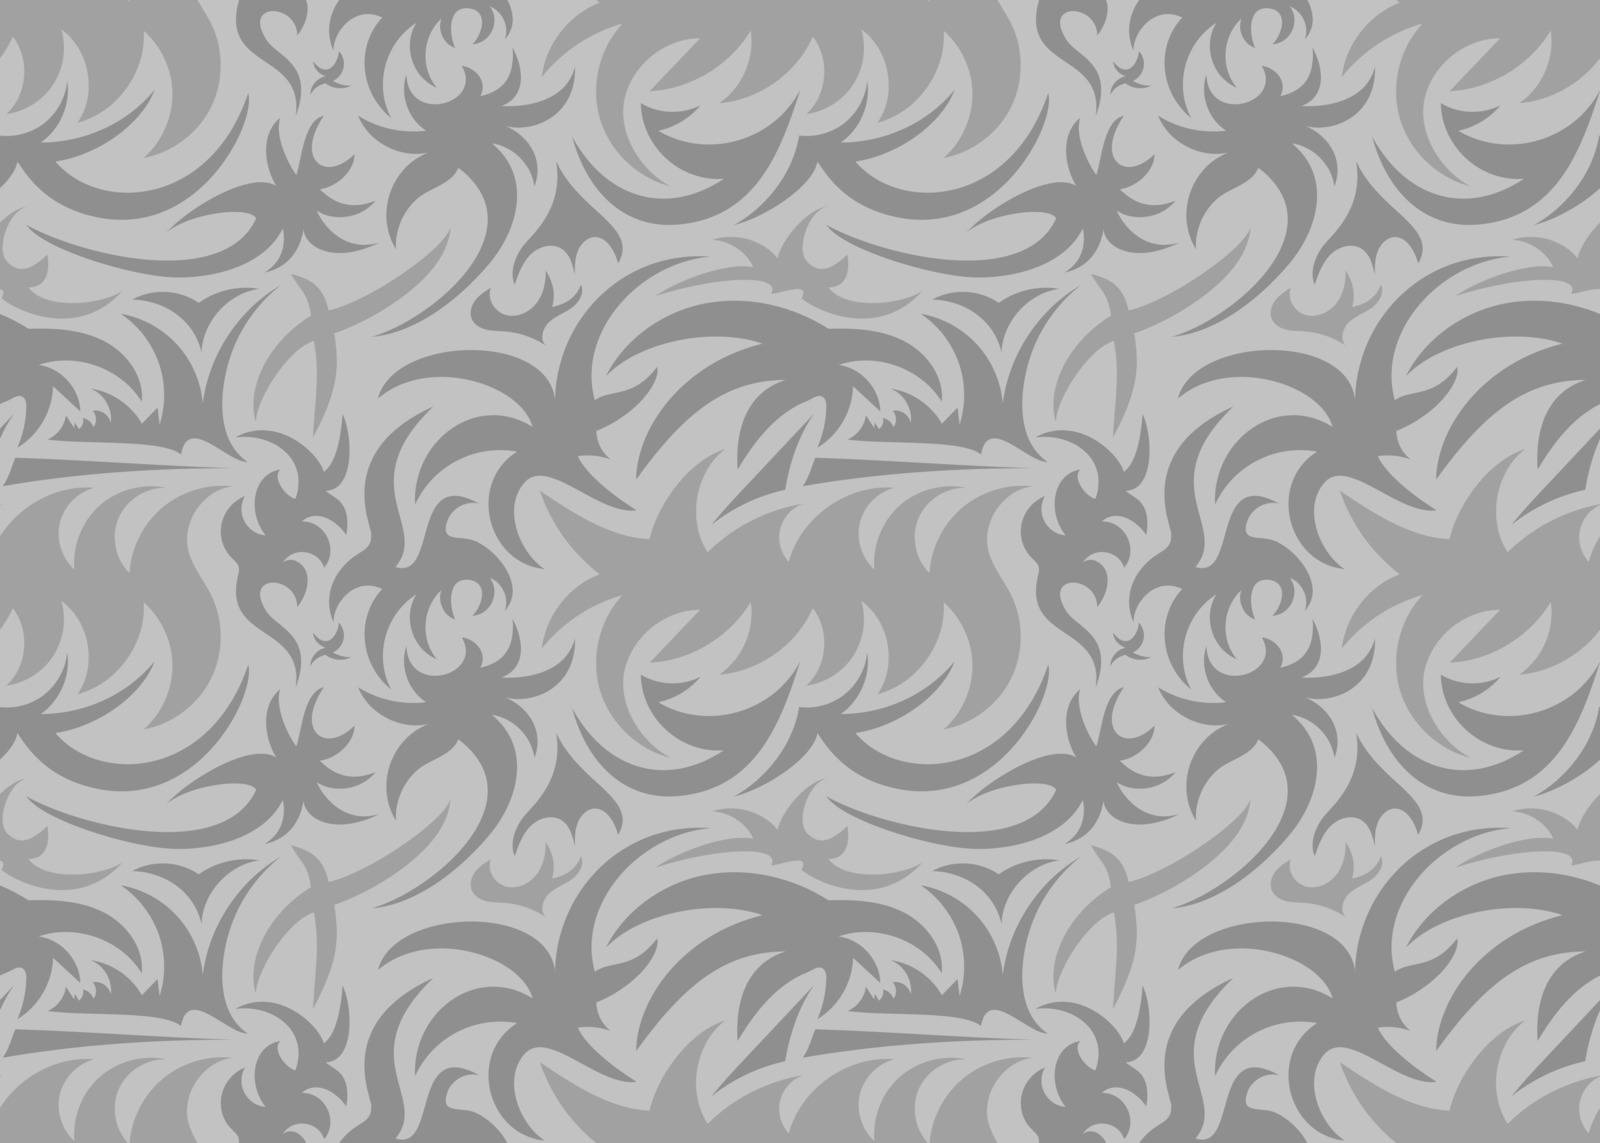 Abstract seamless thorny organic pattern. vector illustration